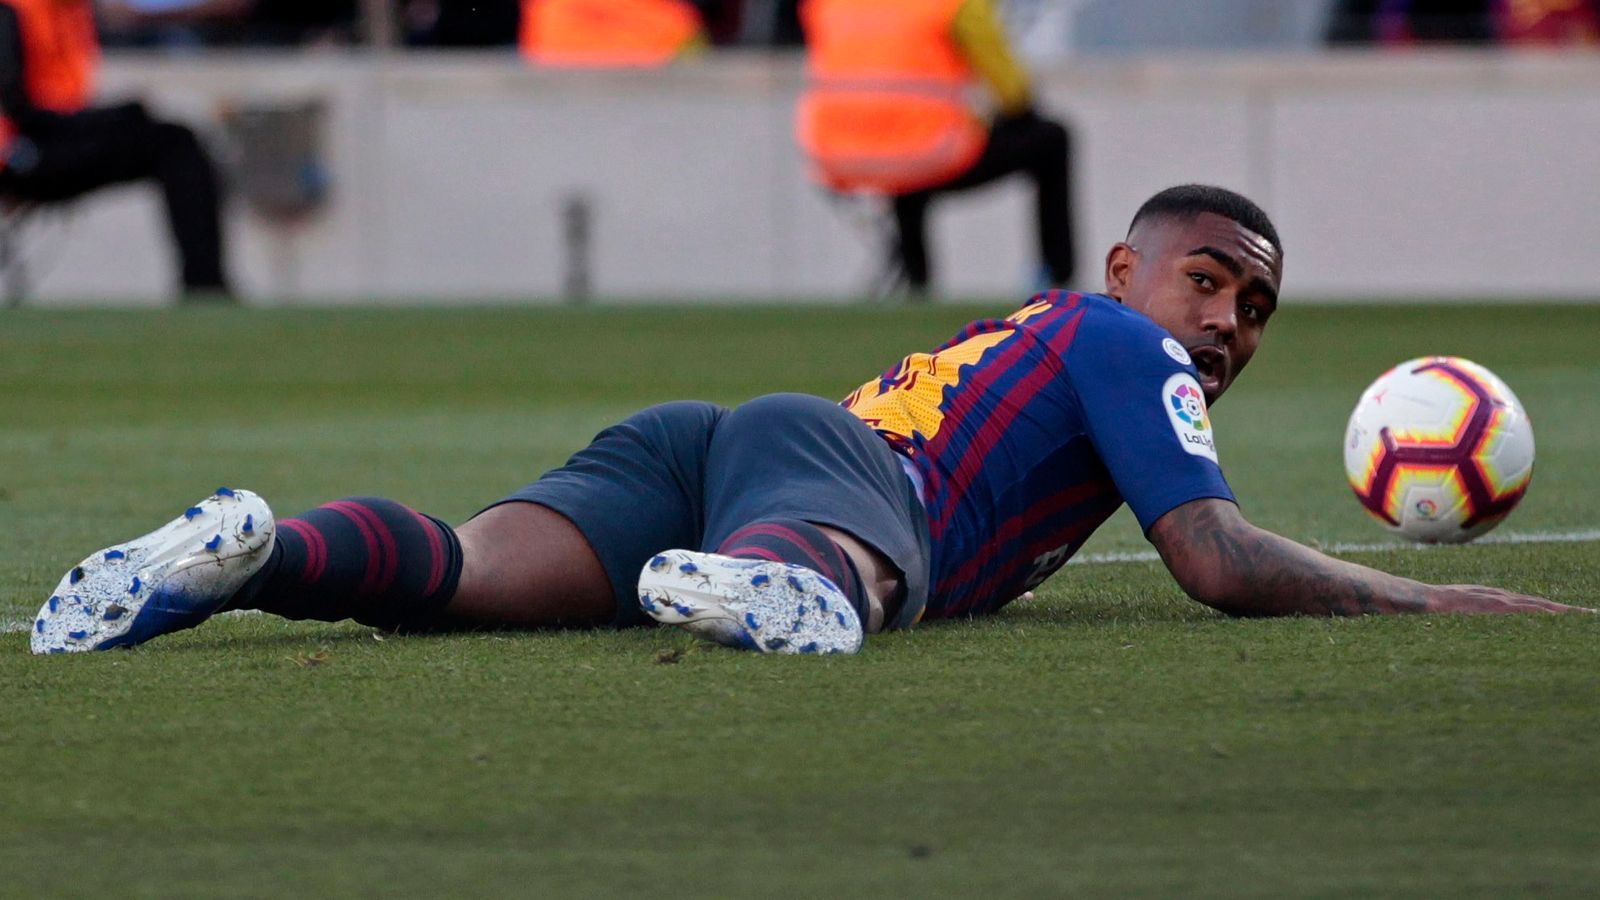  An image of a Barcelona player lying on the ground during a match, with the caption "Barcelonas transfer strategy and player options for Raphinhas replacement".